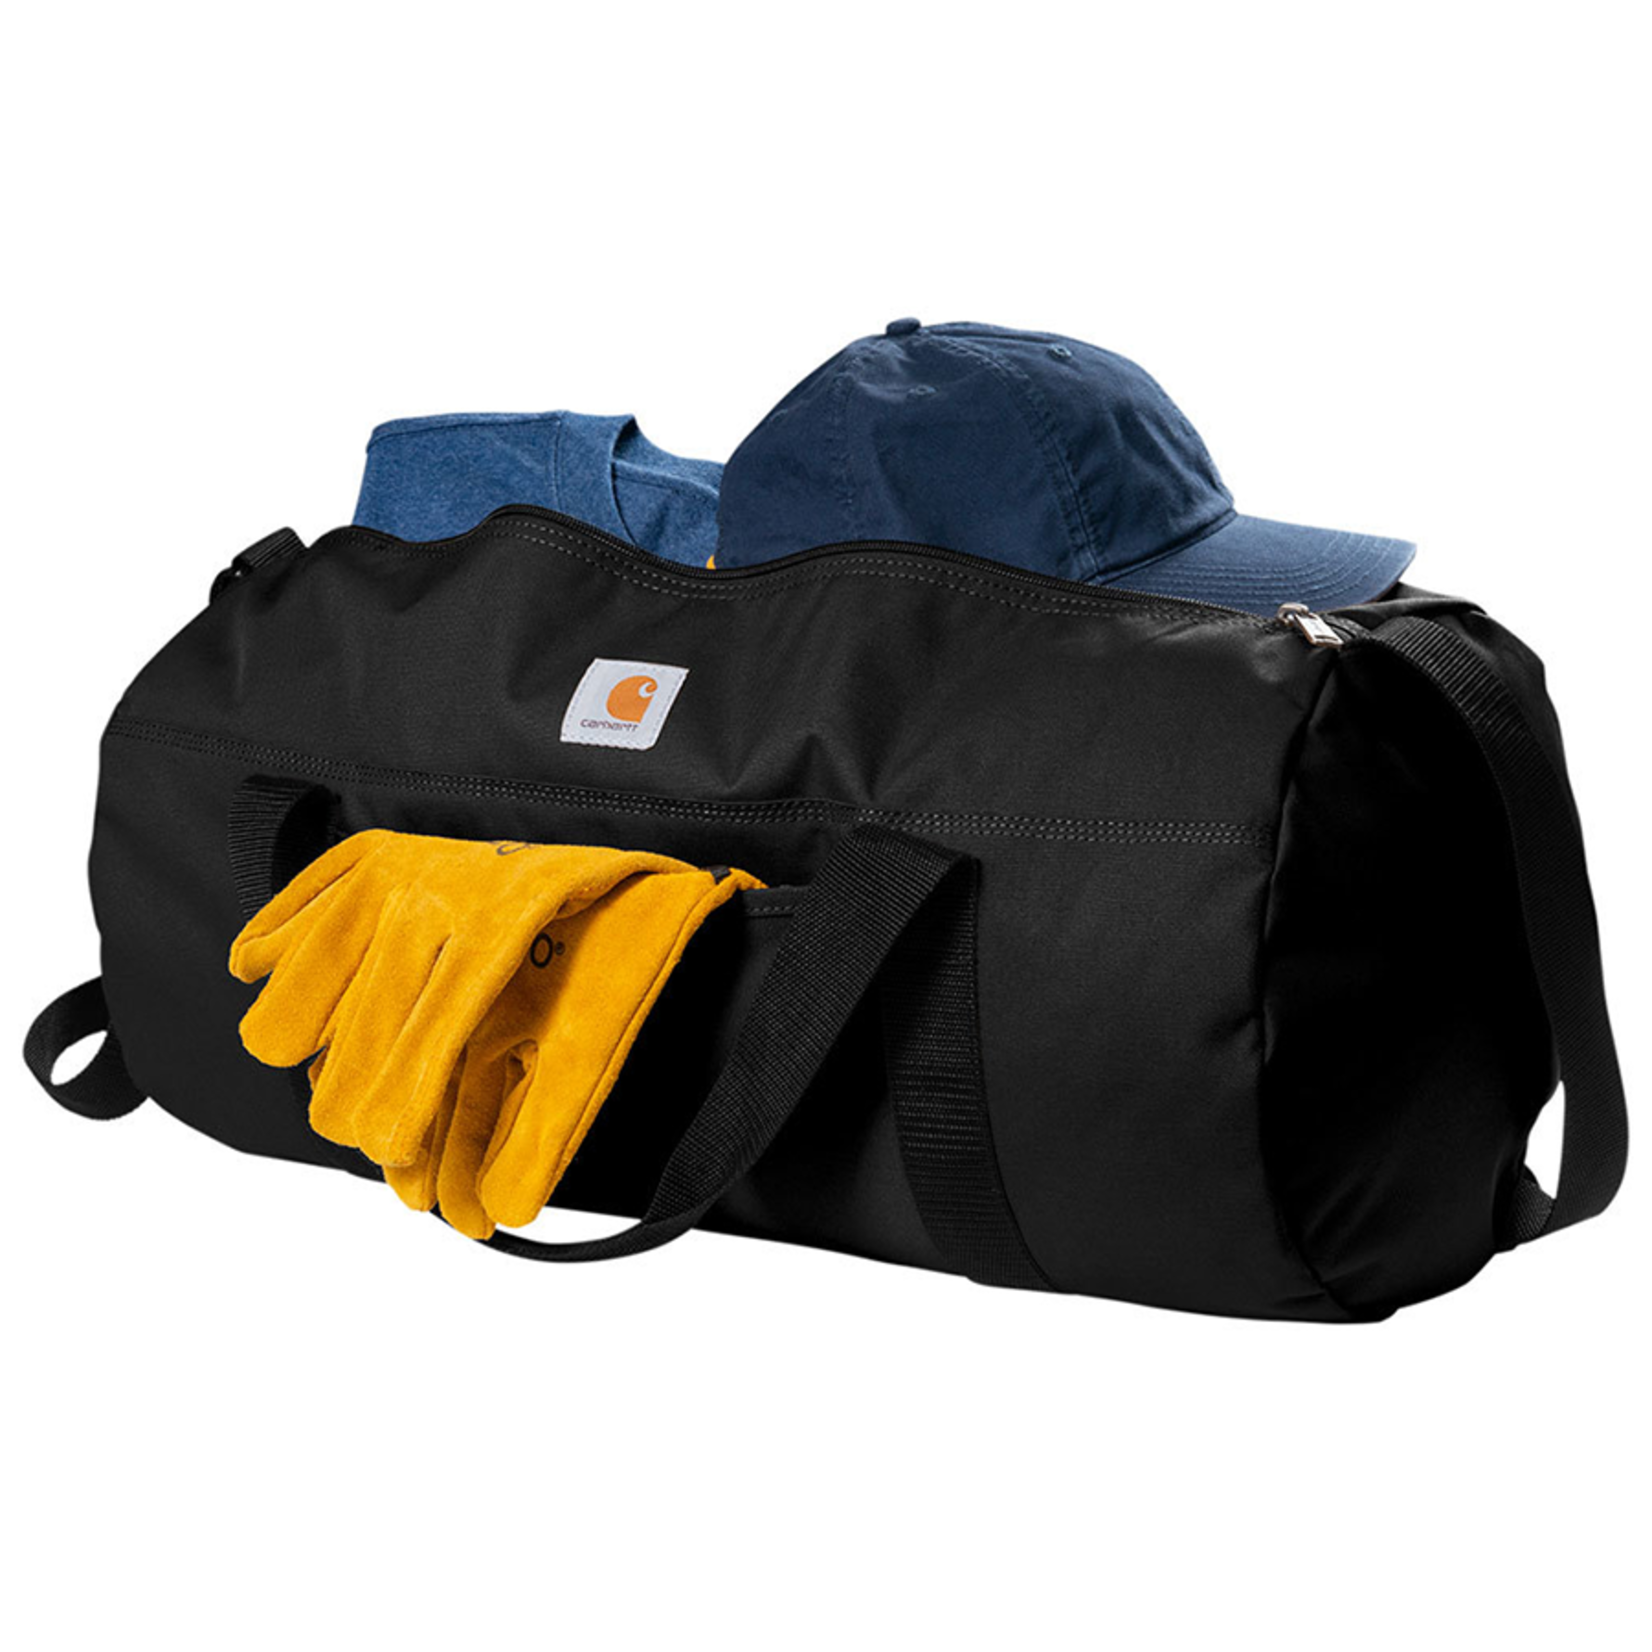 Carhartt CT89105112 - Carhartt Canvas Packable Duffle with Pouch